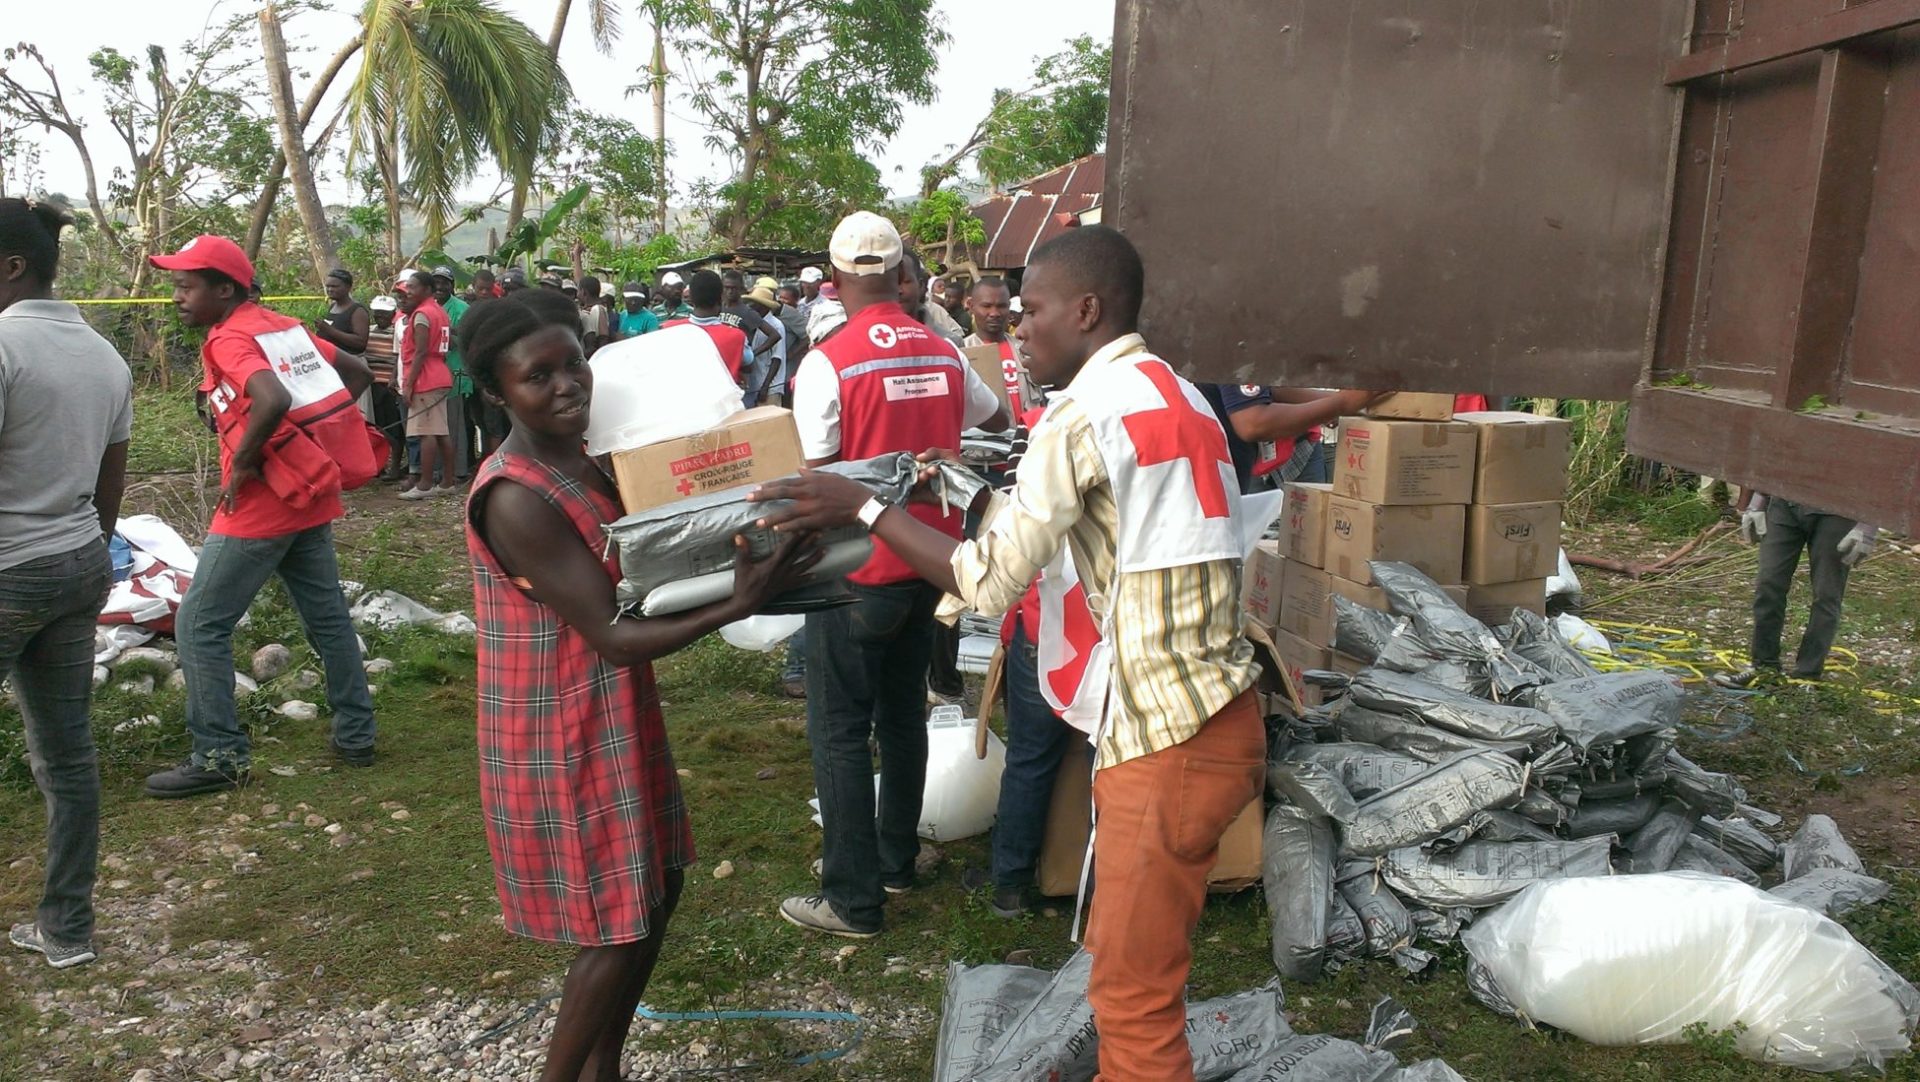 Red Cross aid worker hands over a number of items to a young woman. In the background, other items are distributed to a waiting crowd.